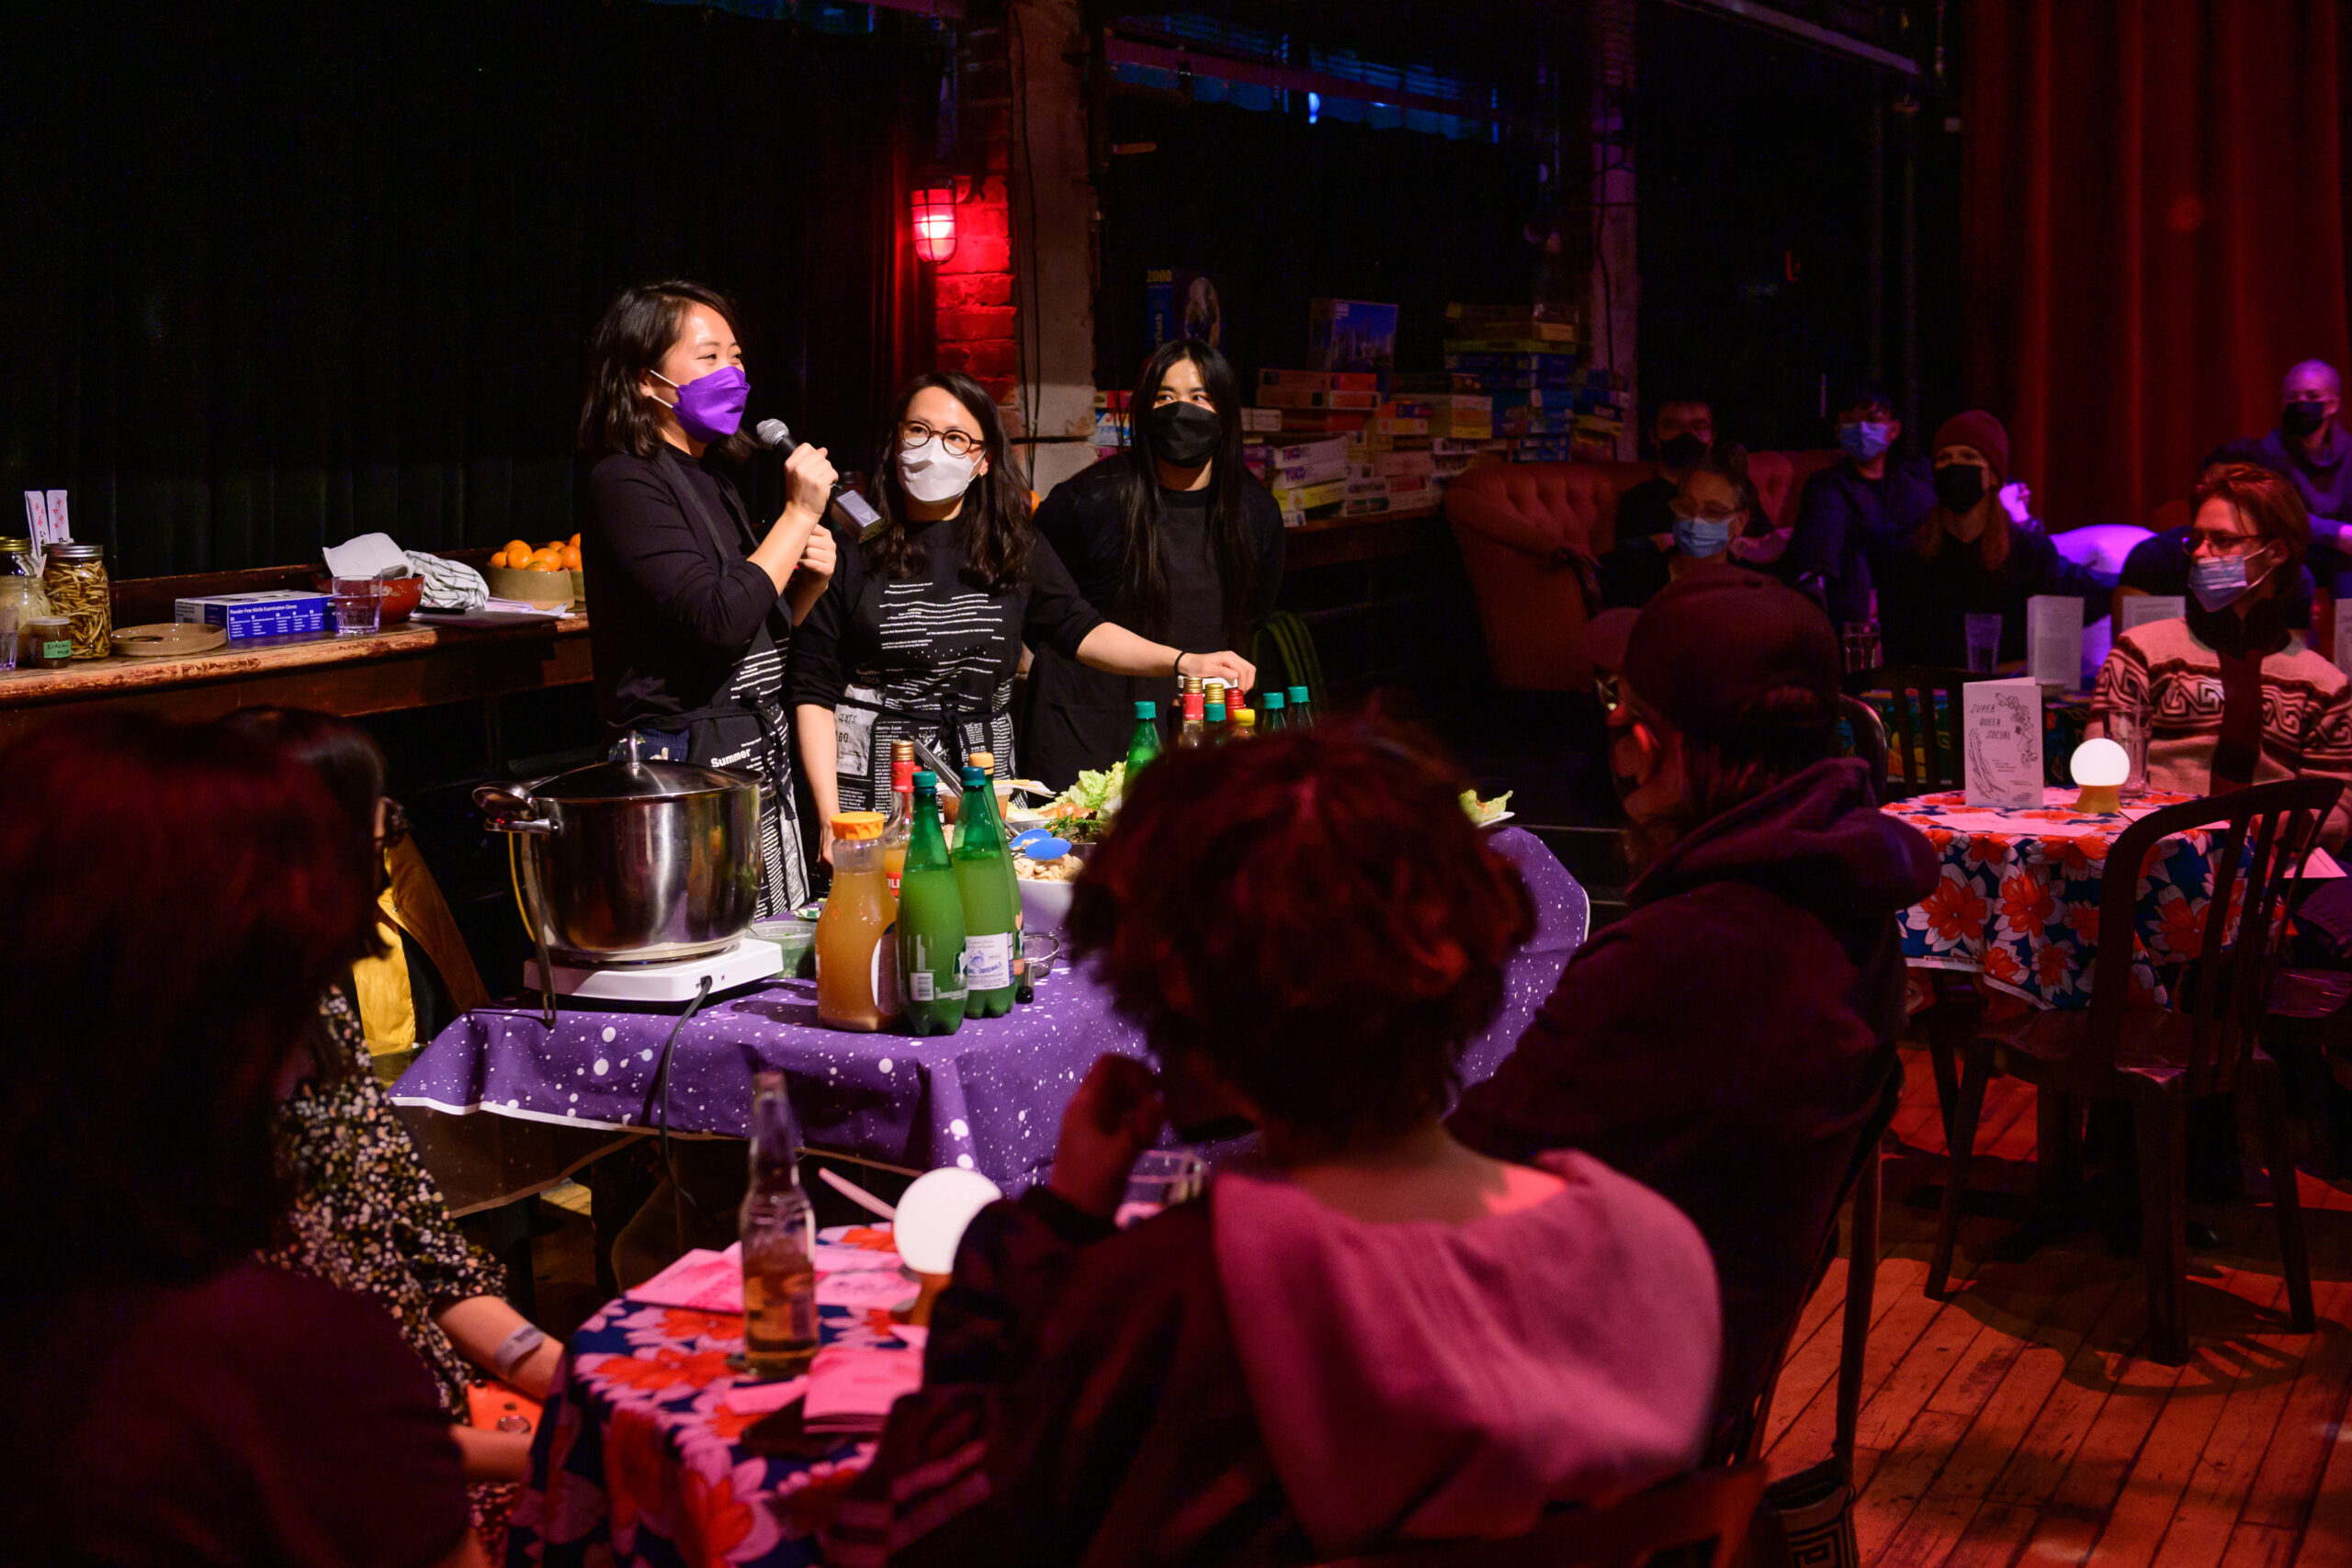 Image of three mashed artists addressing the audience from behind their serving table. The Cabaret is full of audience members seated with drinks and food at tables or on couches.